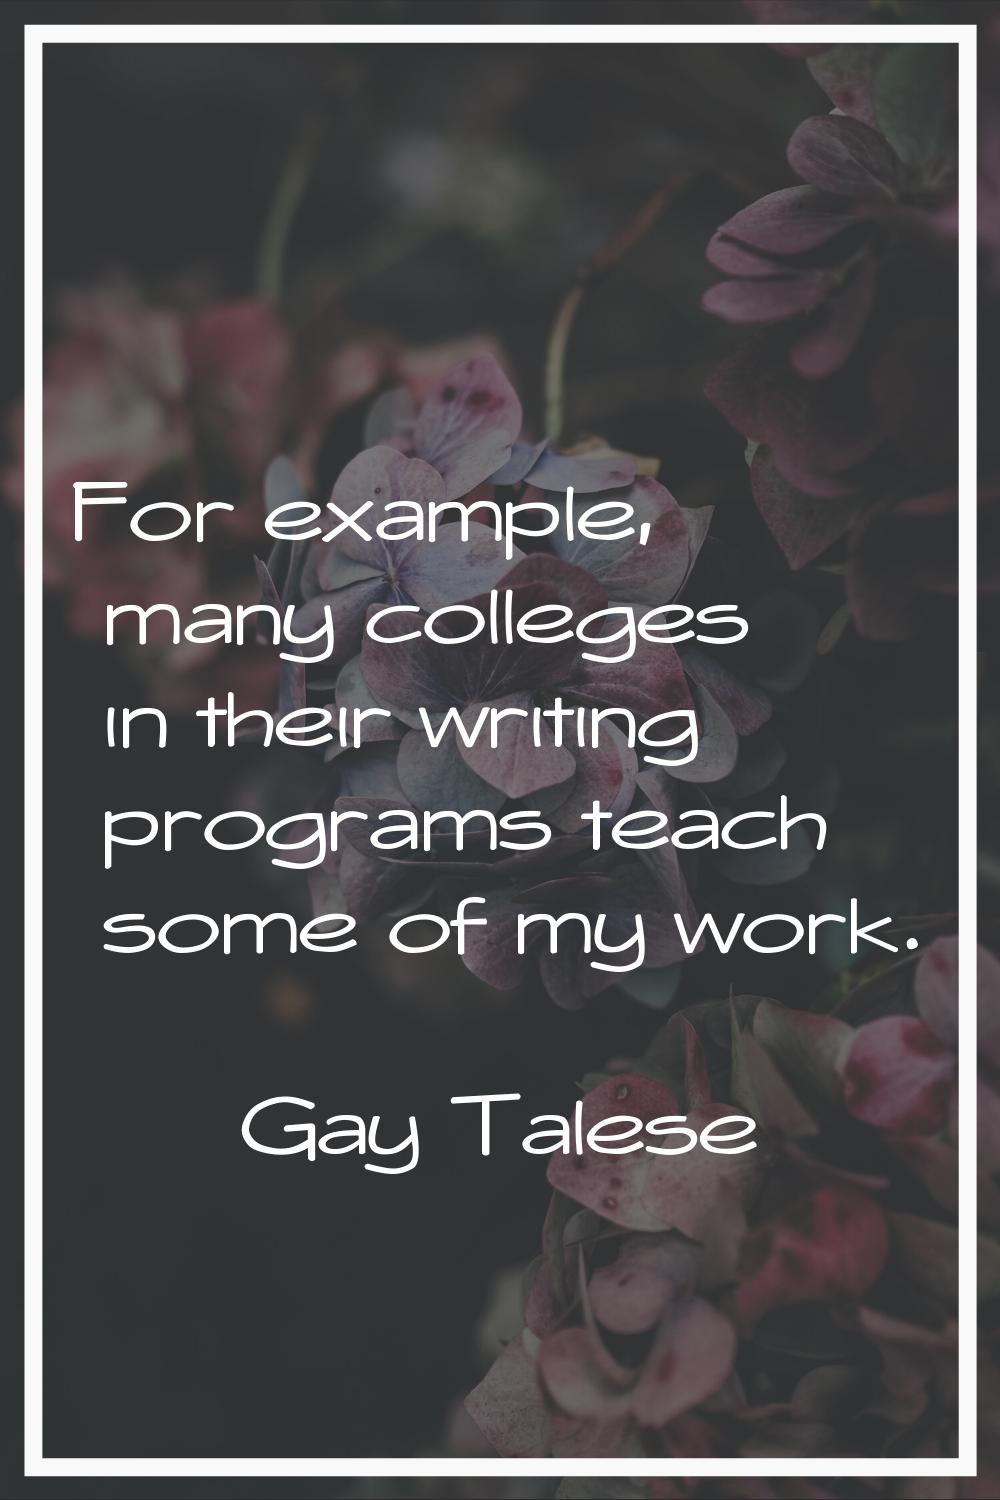 For example, many colleges in their writing programs teach some of my work.